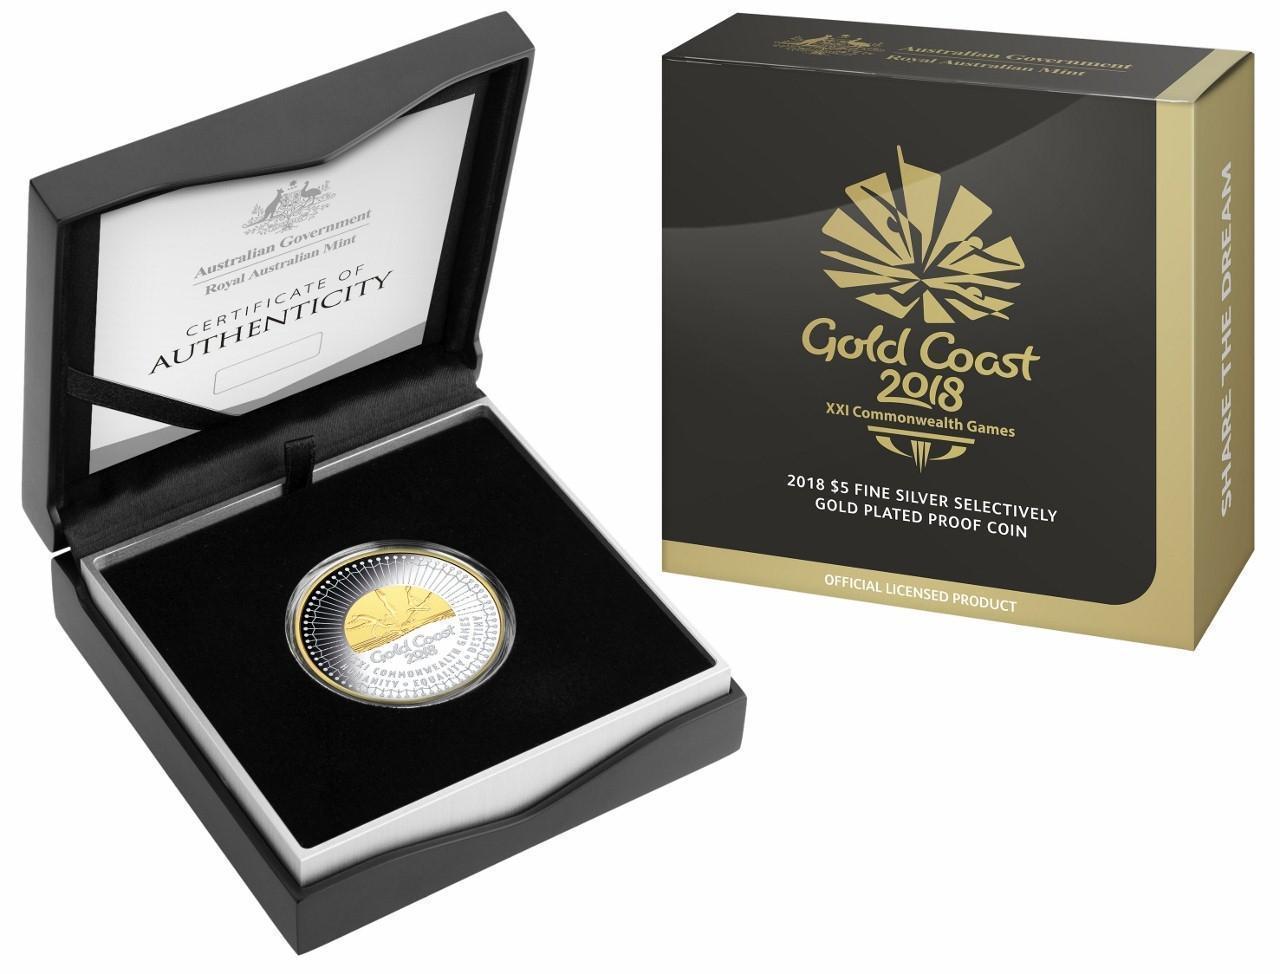 $5 Fine Silver Selectively Gold Plated Proof Coin